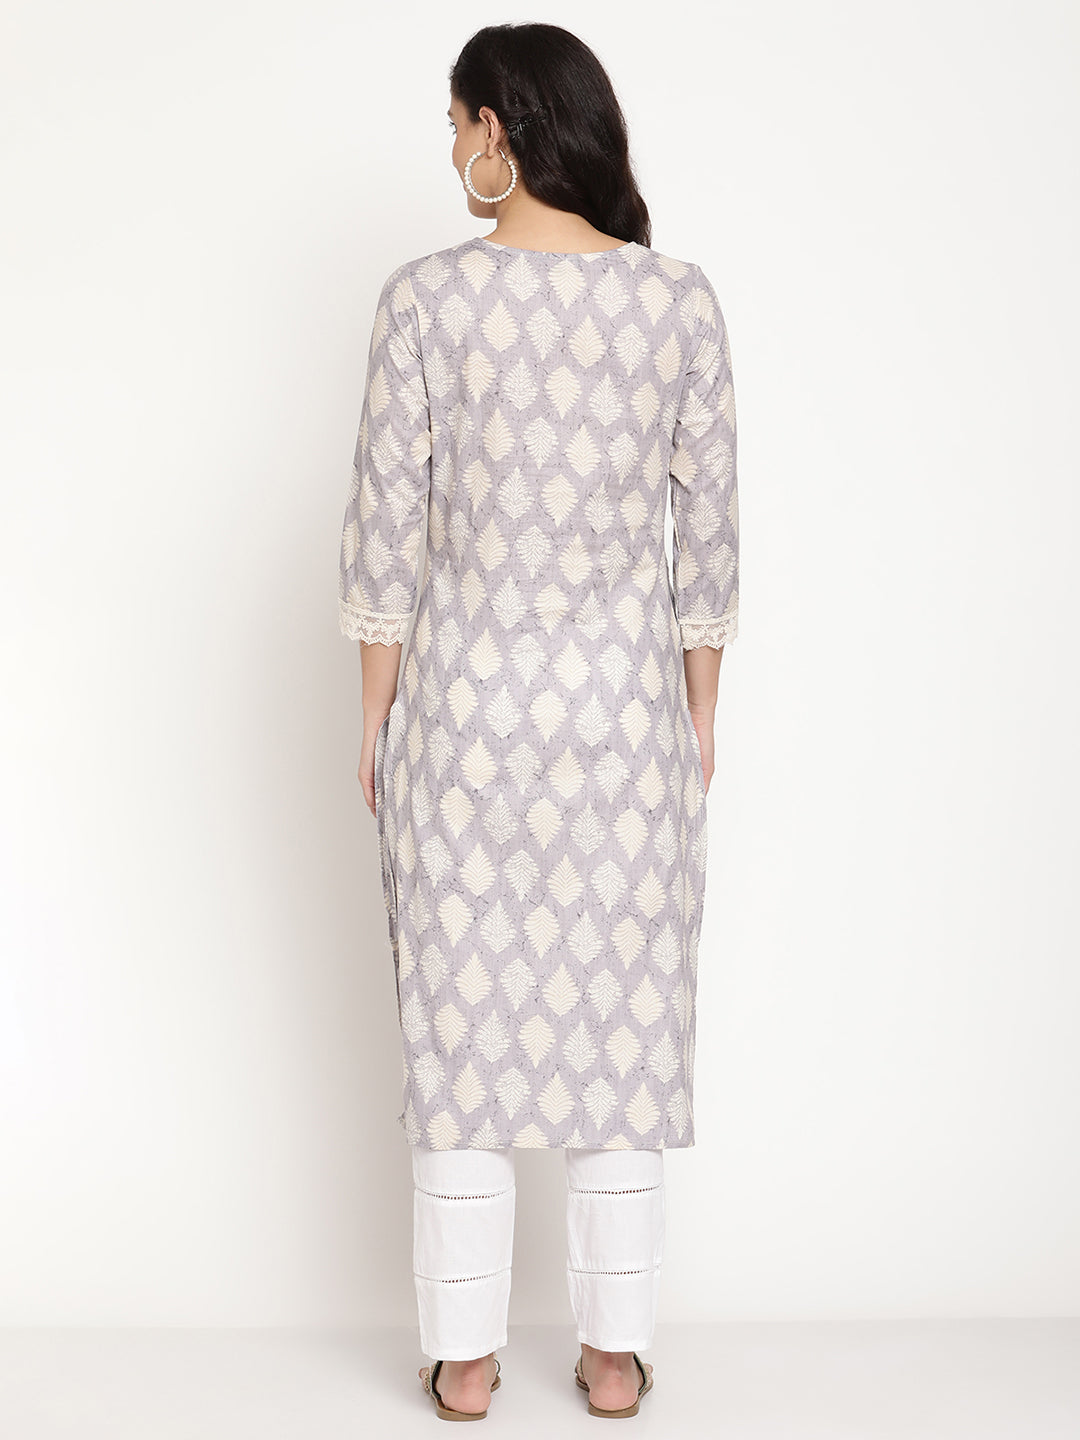 Be Indi Women Grey Color Butta Print Cheifly Embroidred Lace And Fabric Button Detailing Kurta